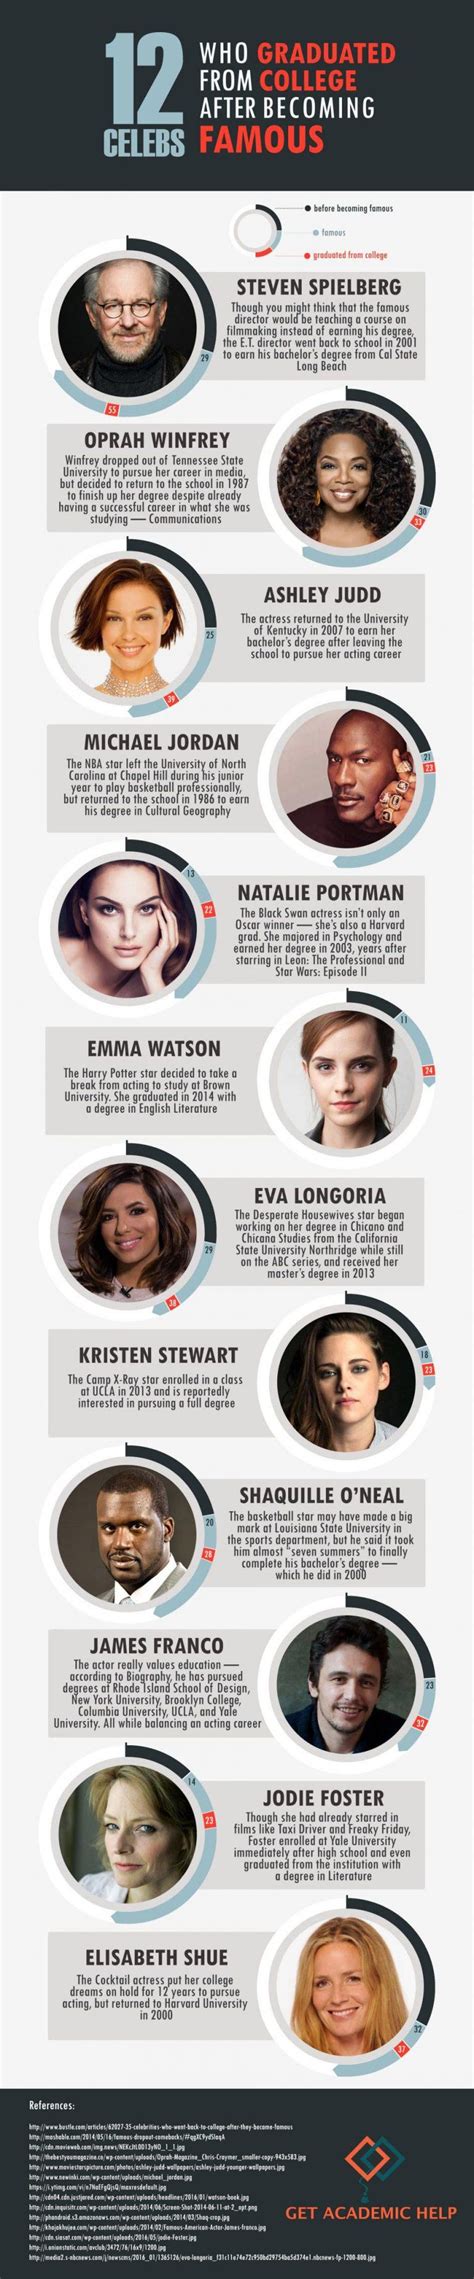 Celebrities Who Graduated After Becoming Famous Infographic E